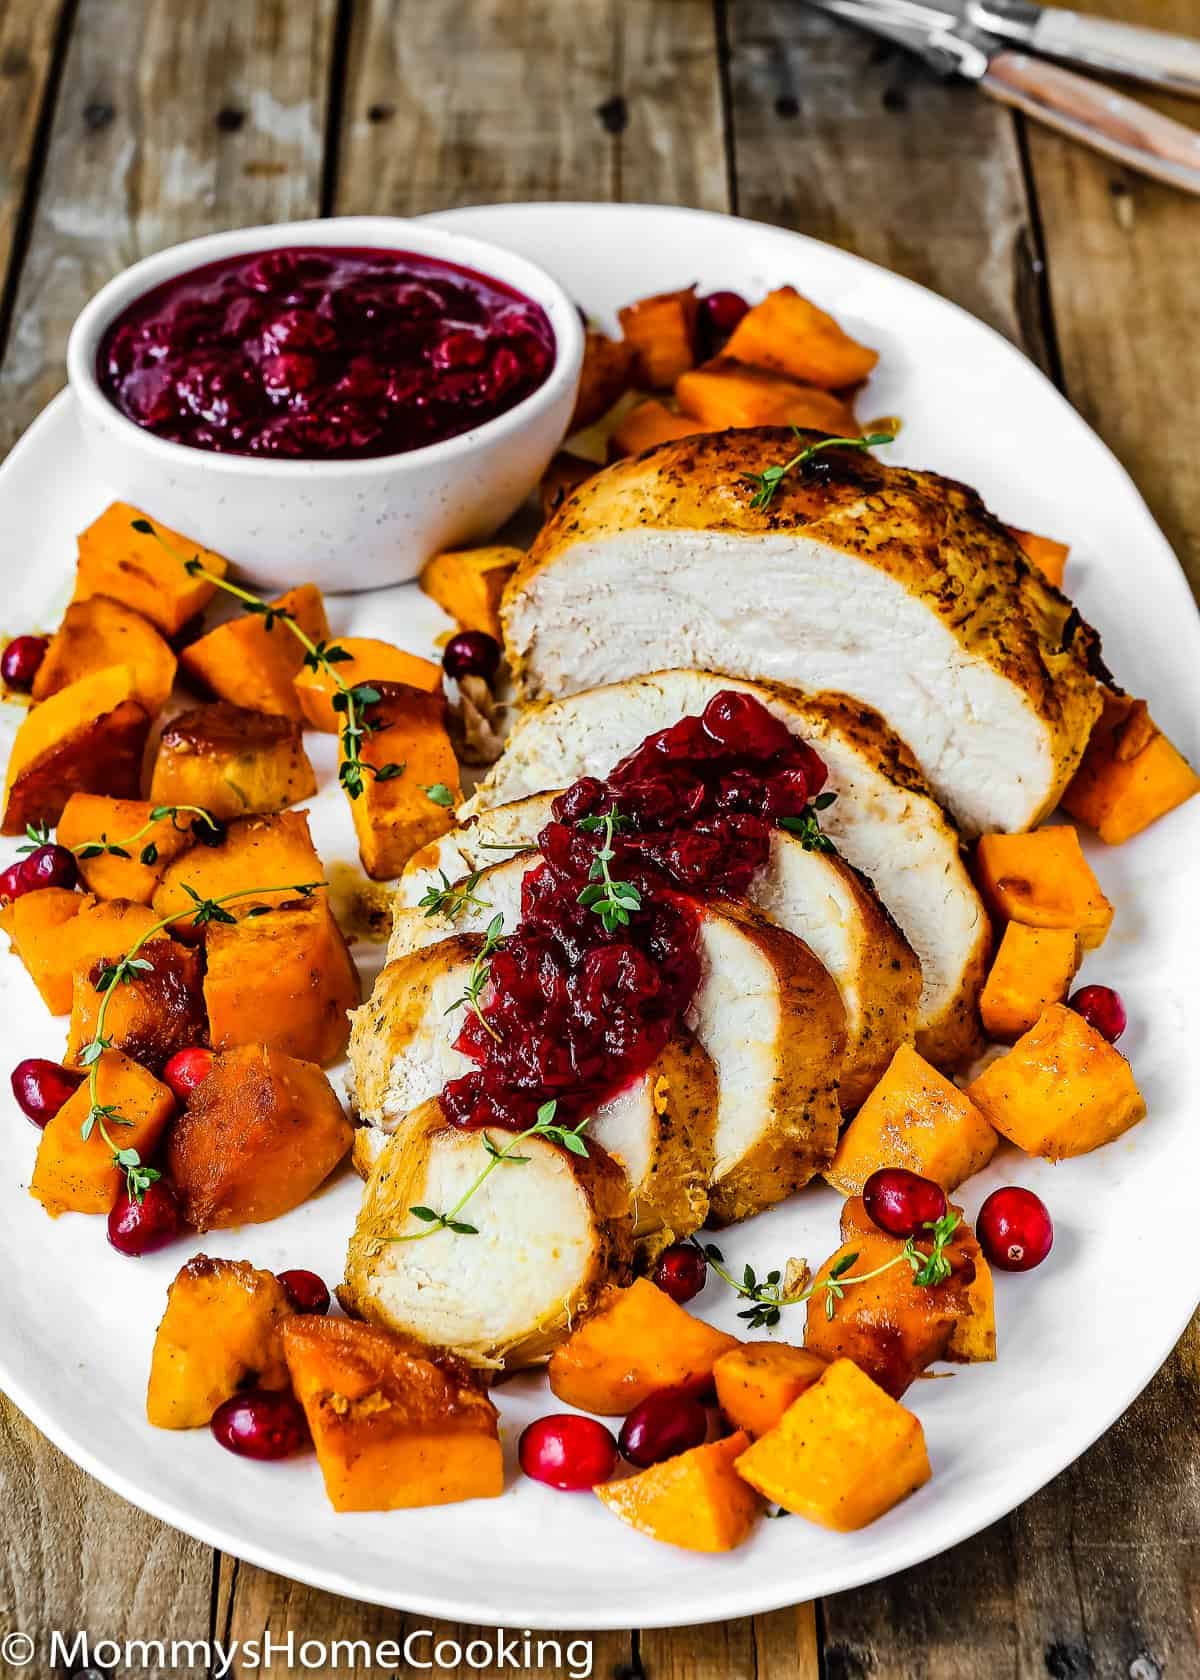 Cranberry Sauce over slices turkey in a plate